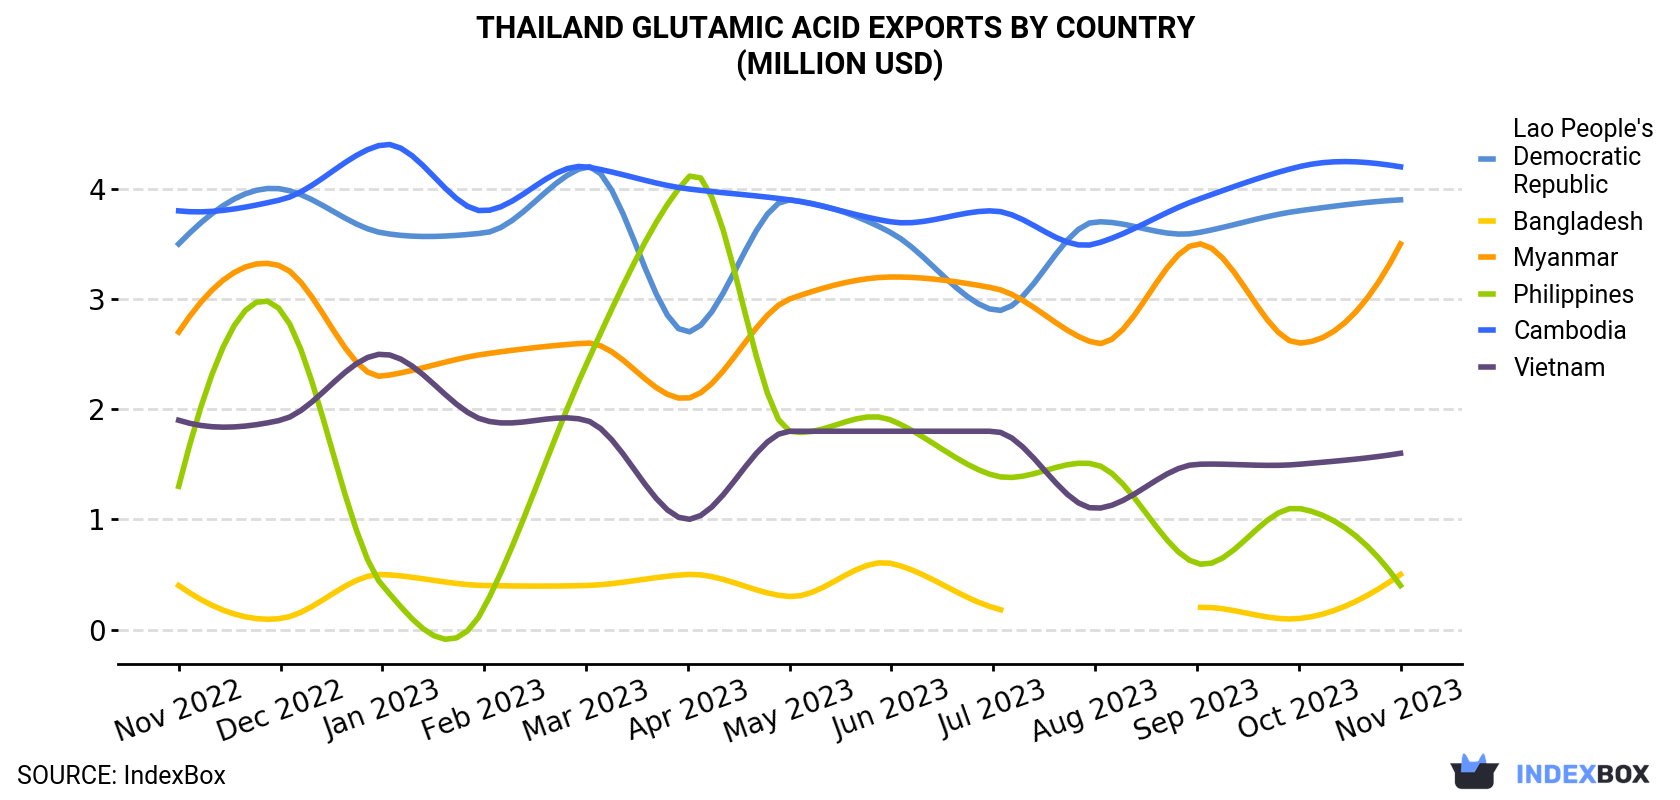 Thailand Glutamic Acid Exports By Country (Million USD)